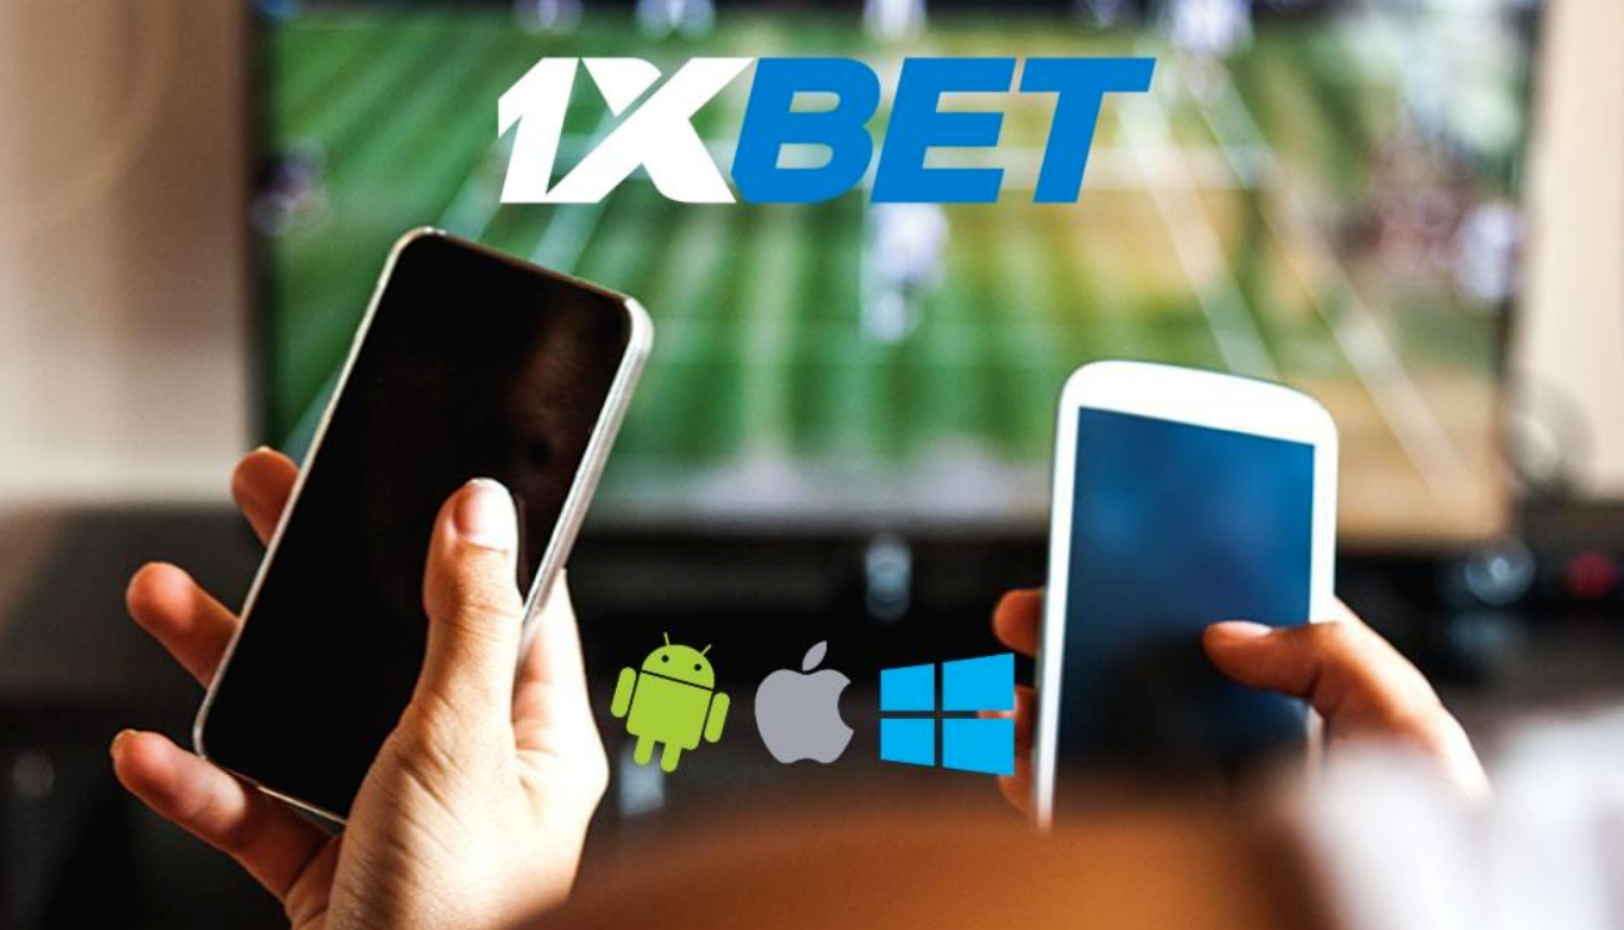 1xBet apk Android